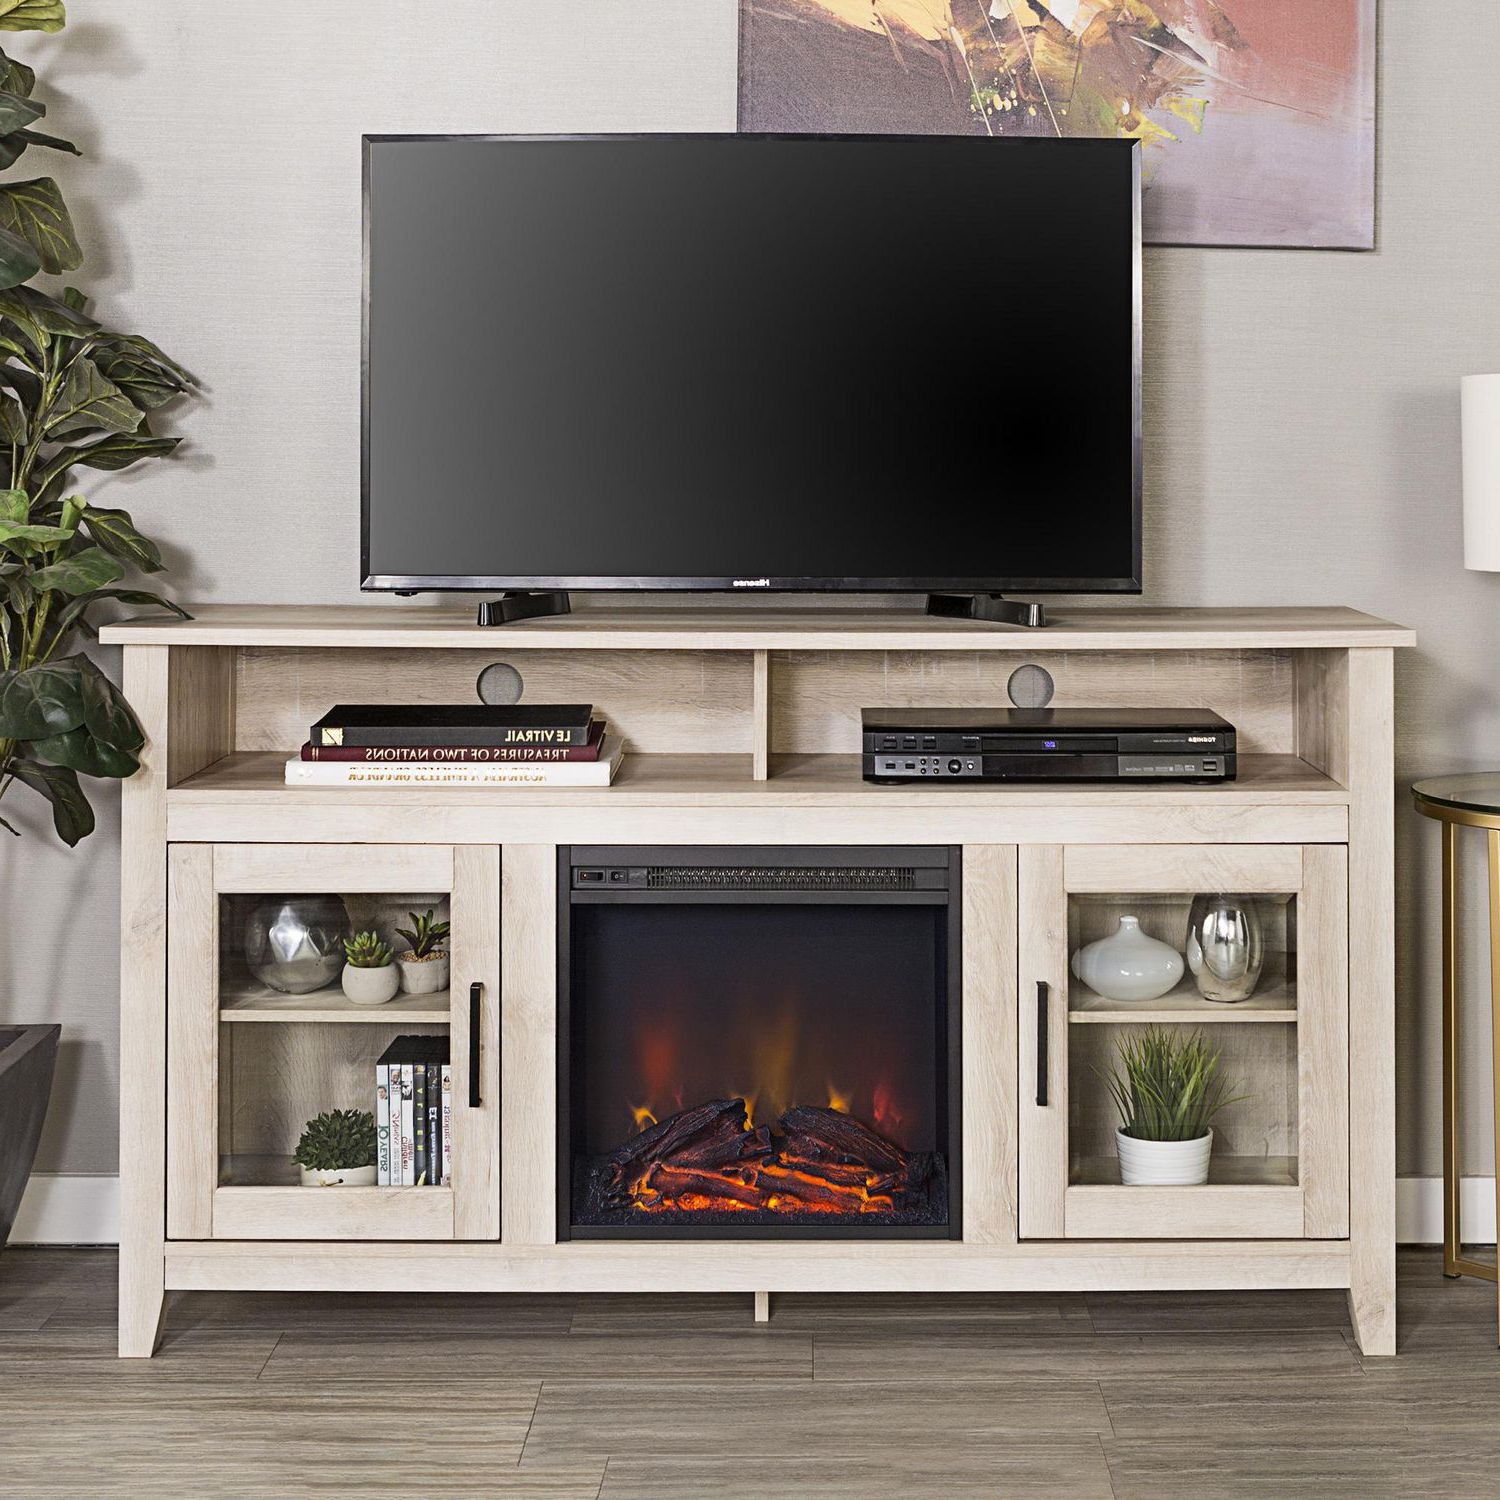 Fashionable Wood Highboy Fireplace Tv Stands Throughout Manor Park 58" Wood Highboy Fireplace Media Tv Stand Console – White (View 9 of 15)